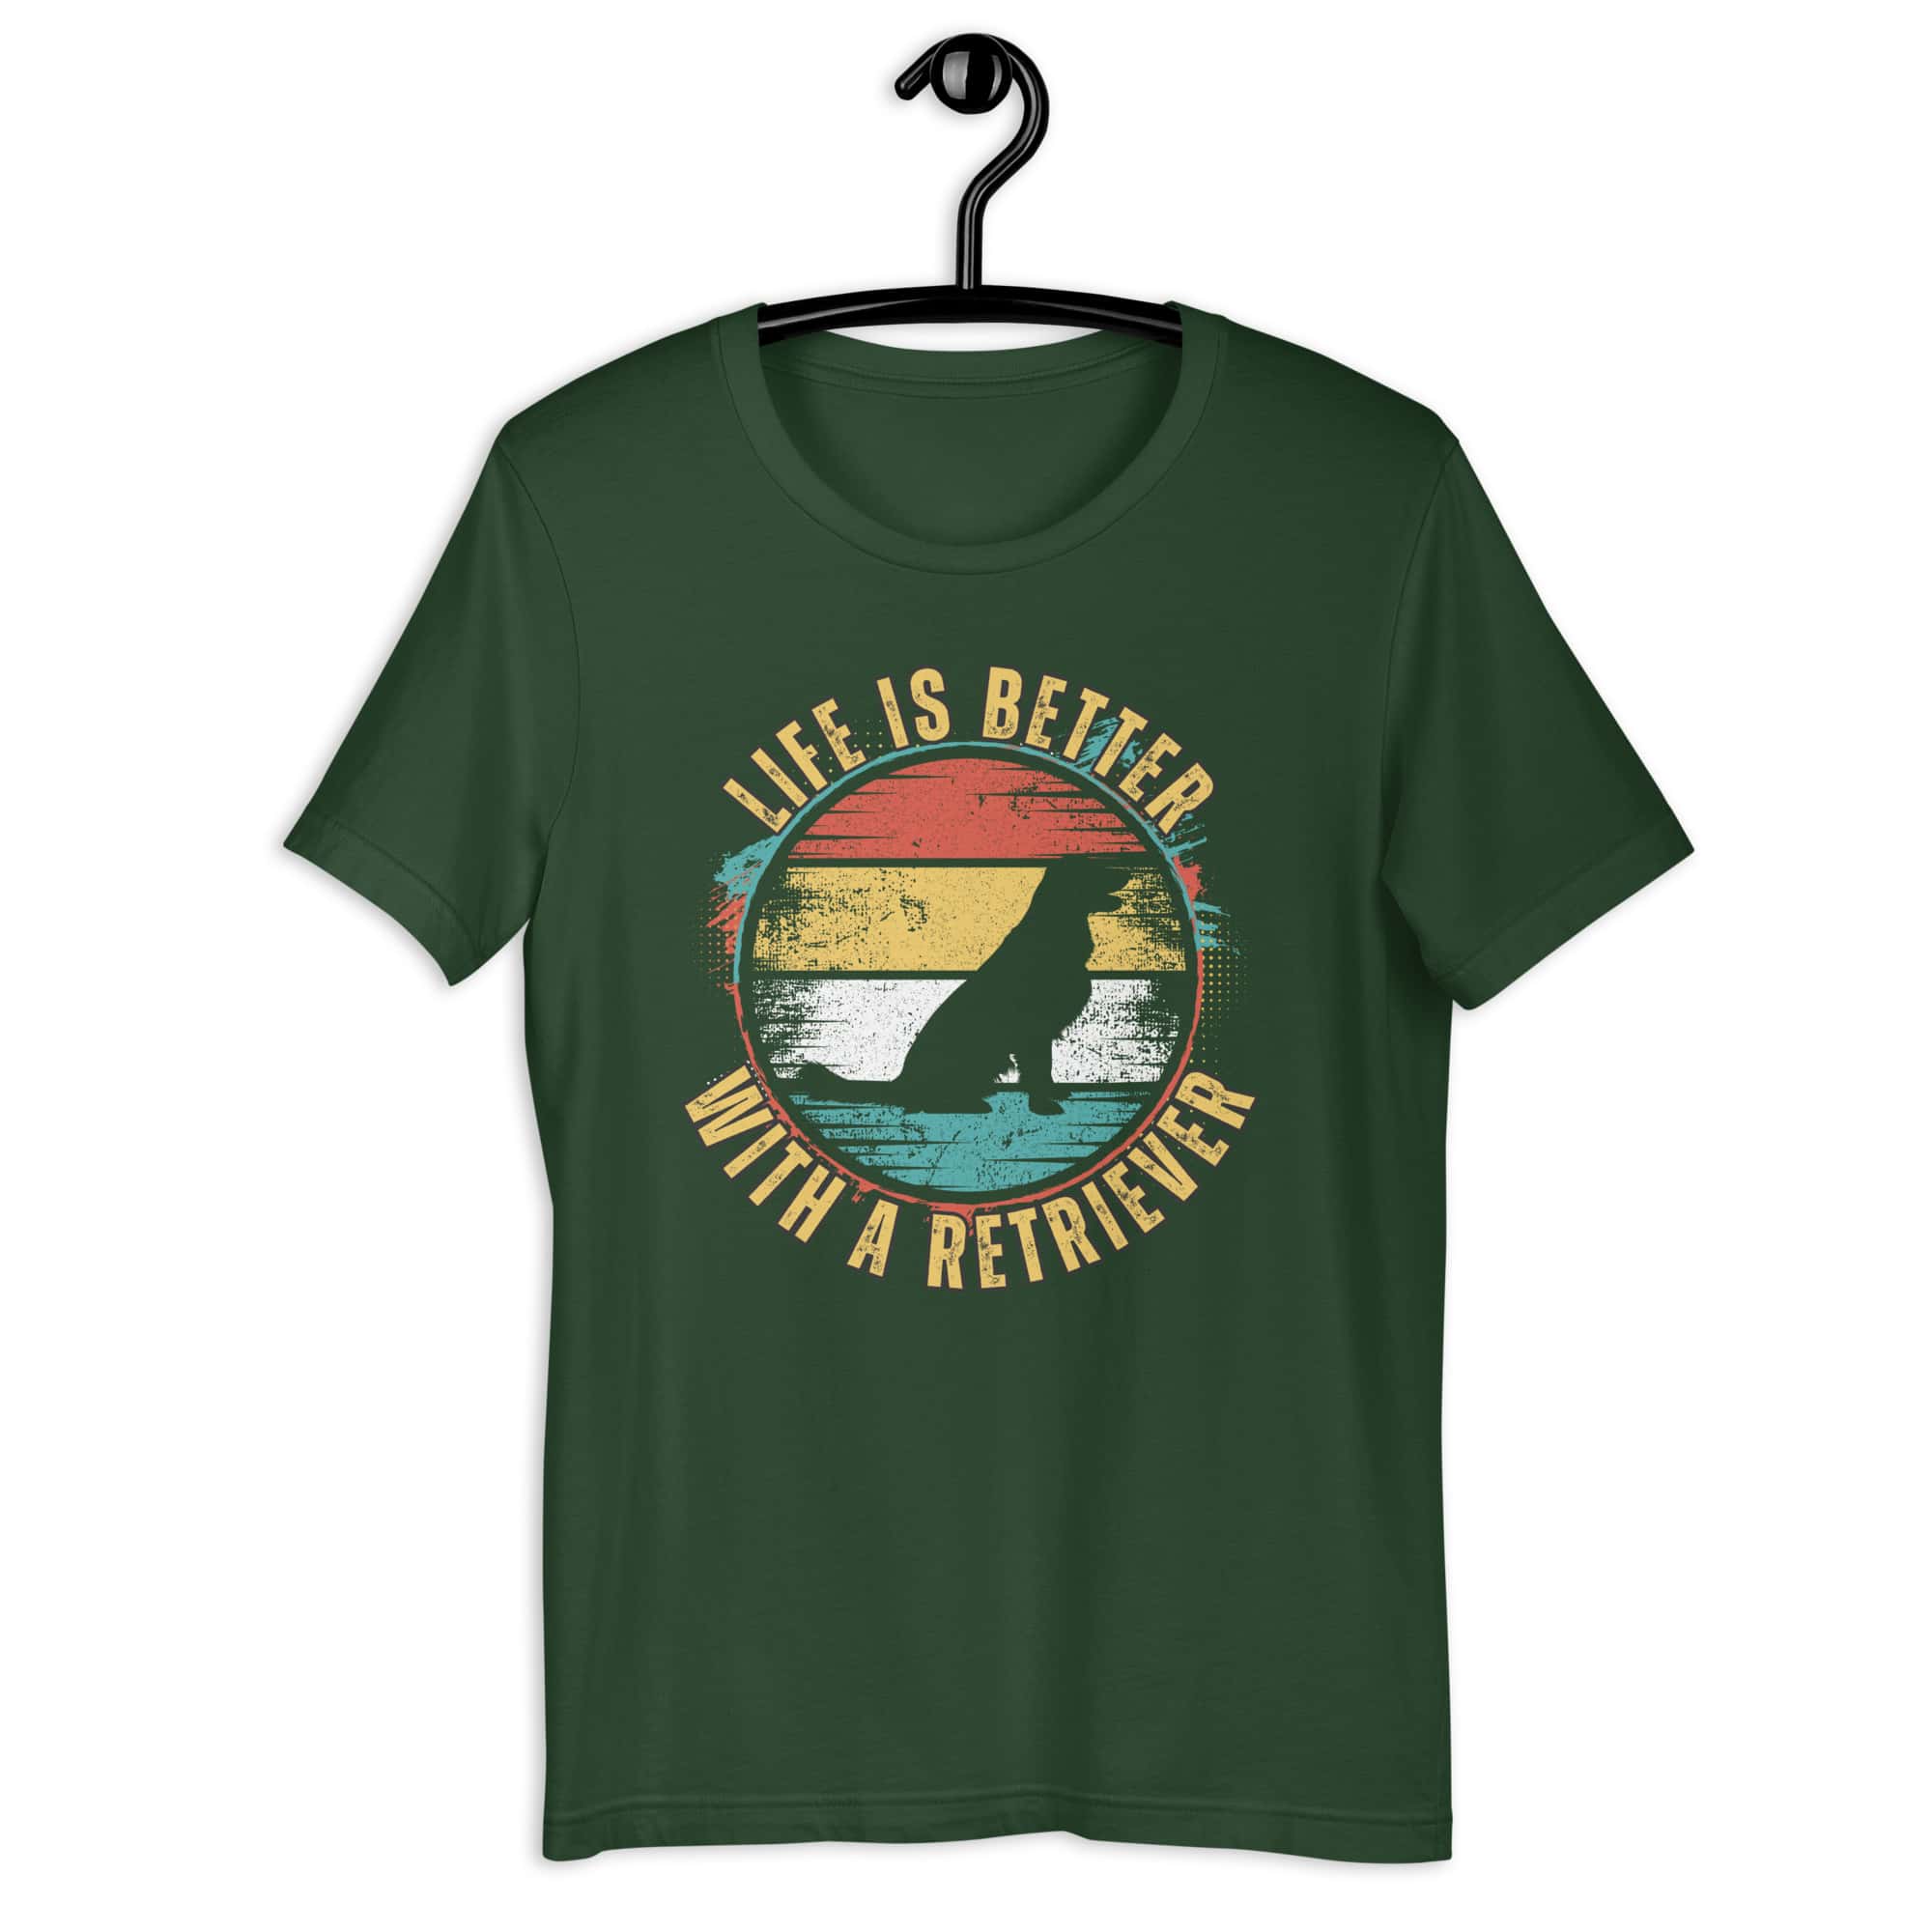 Life is Better With A Retriever Unisex T-Shirt